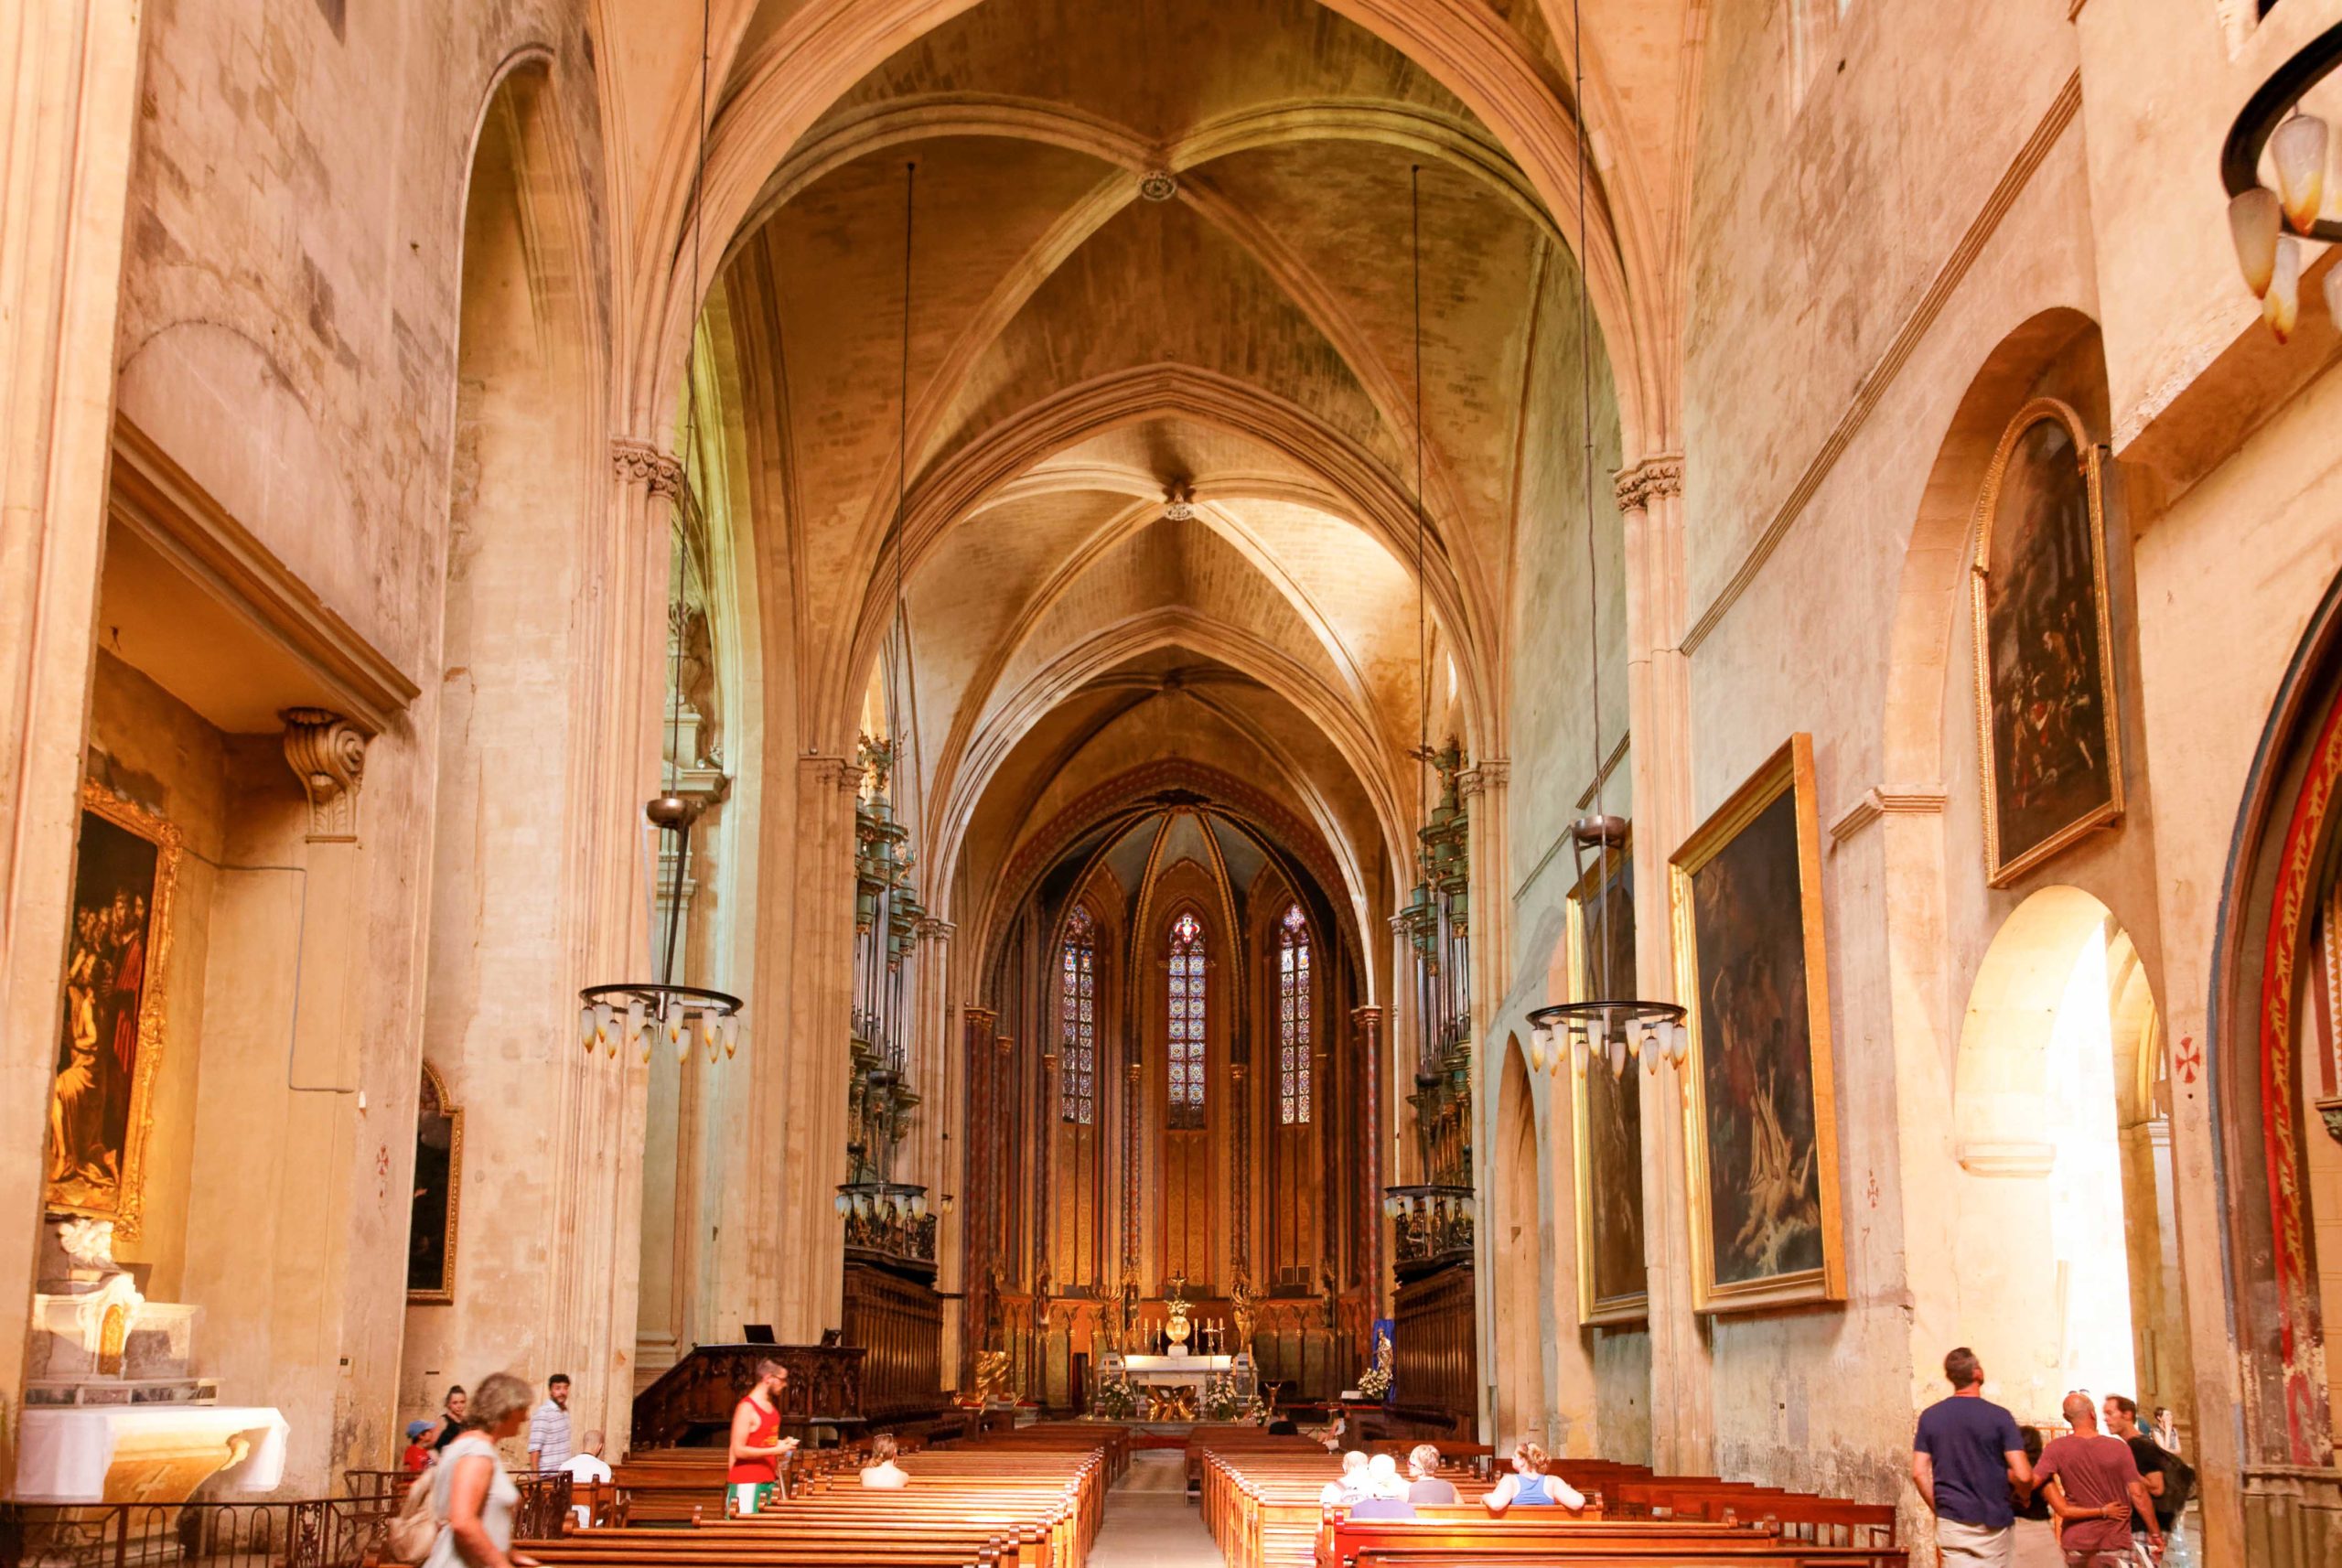 The Gothic nave of Aix-en-Provence Cathedral © Bjs - licence [CC BY-SA 4.0] from Wikimedia Commons